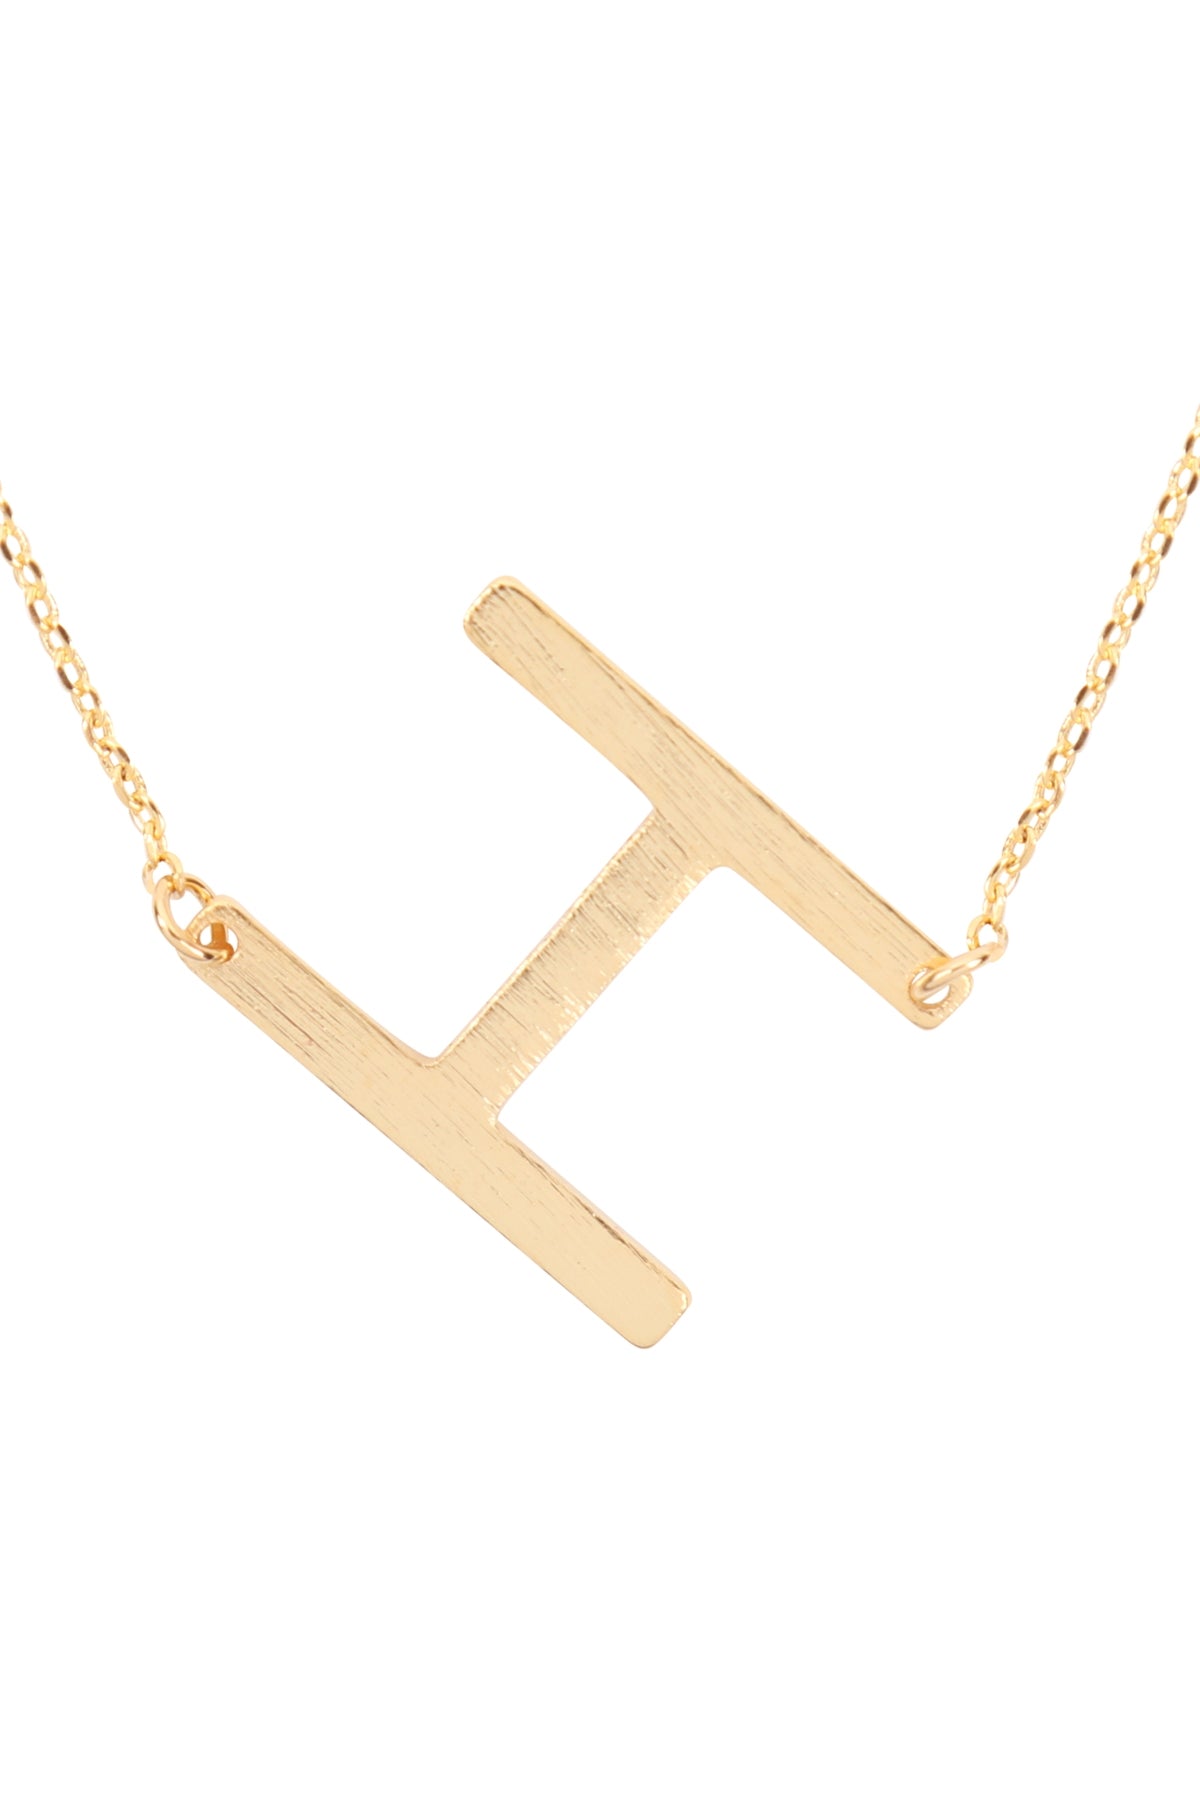 "H" INITIAL ROUGH FINISH CHAIN NECKLACE